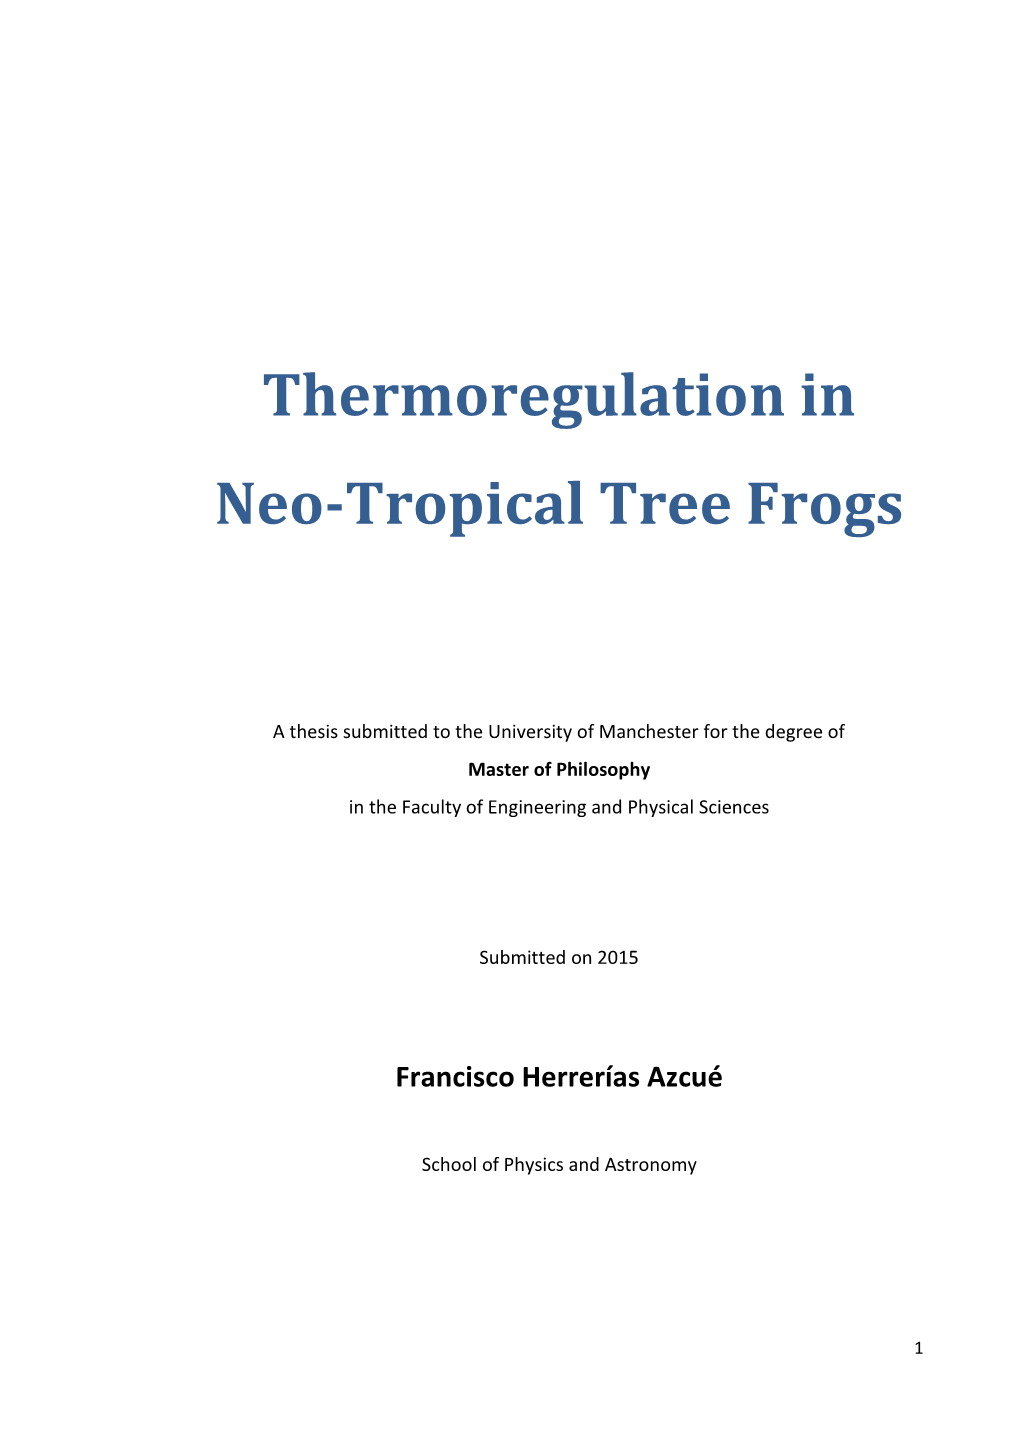 Thermoregulation in Neo-Tropical Tree Frogs